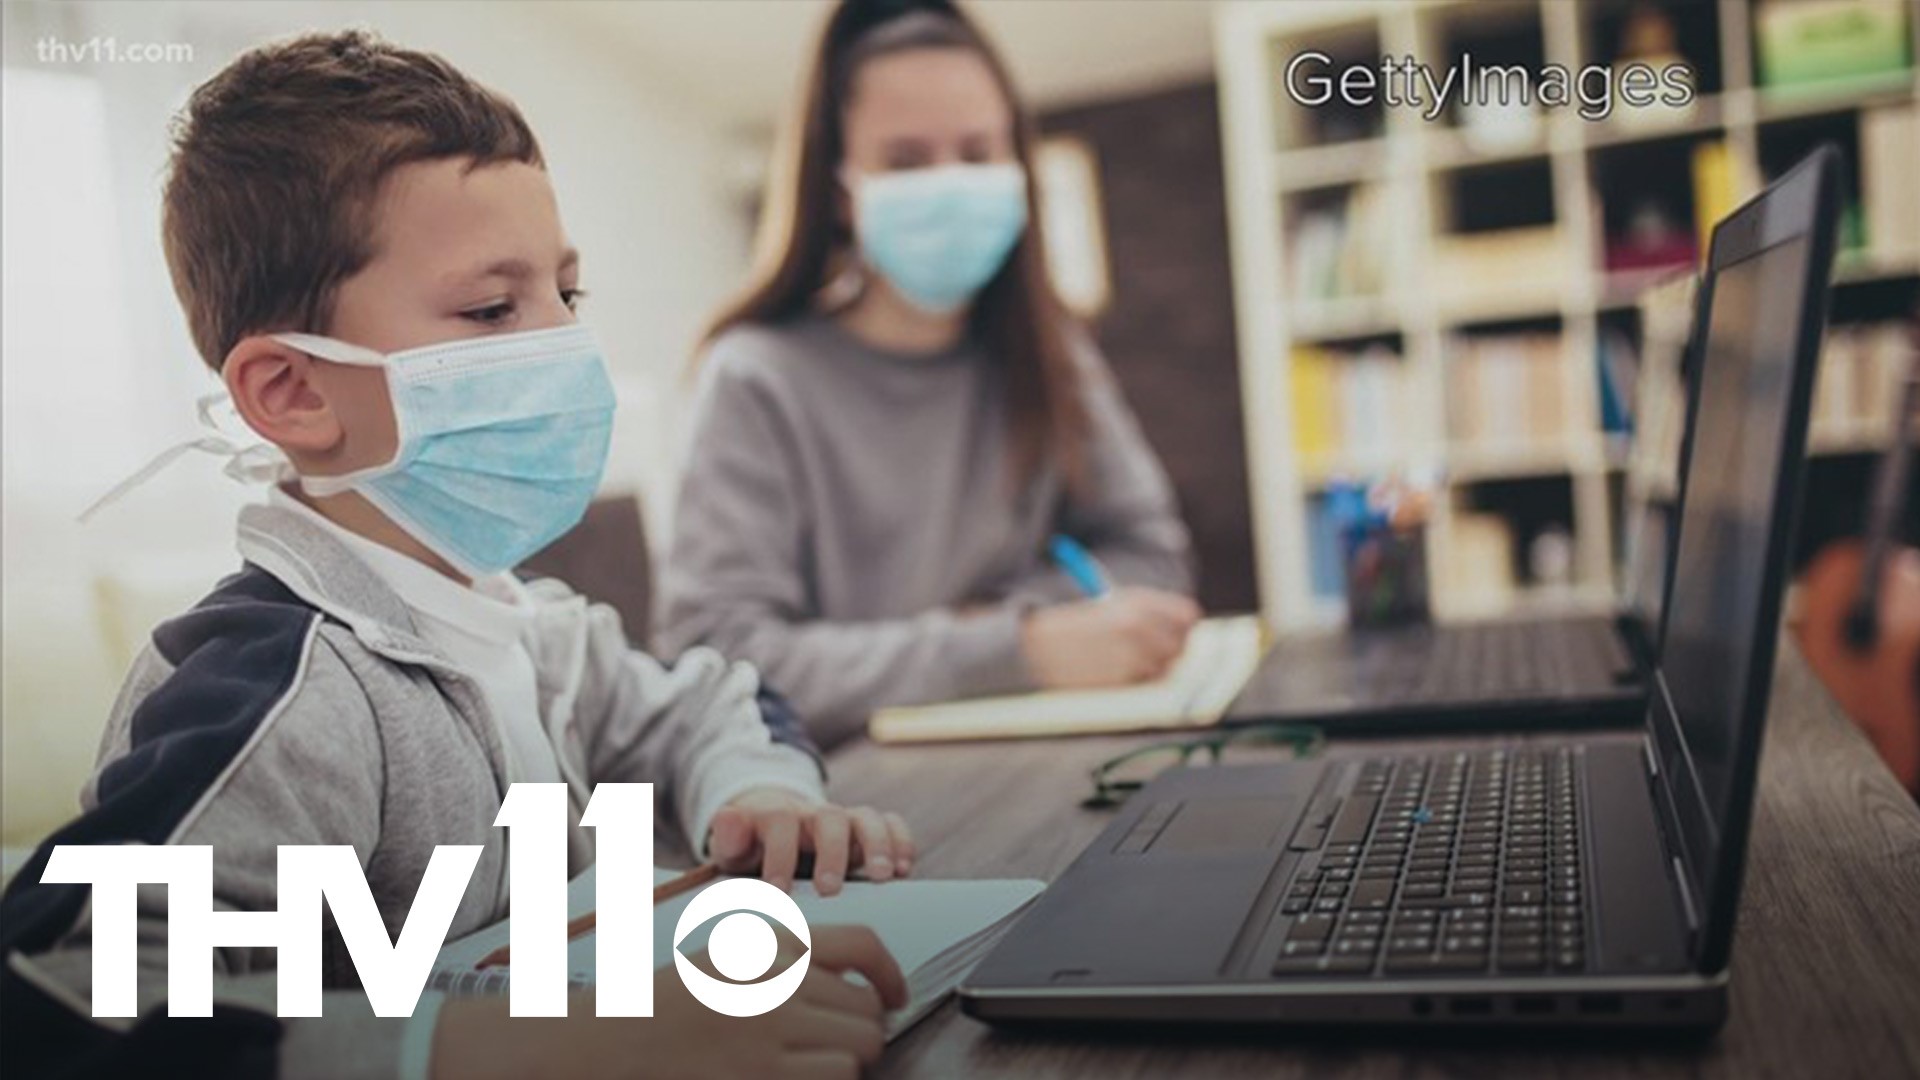 The Little Rock School Board voted on key COVID precautions for staff and students, including a mask mandate and a new vaccine incentive.